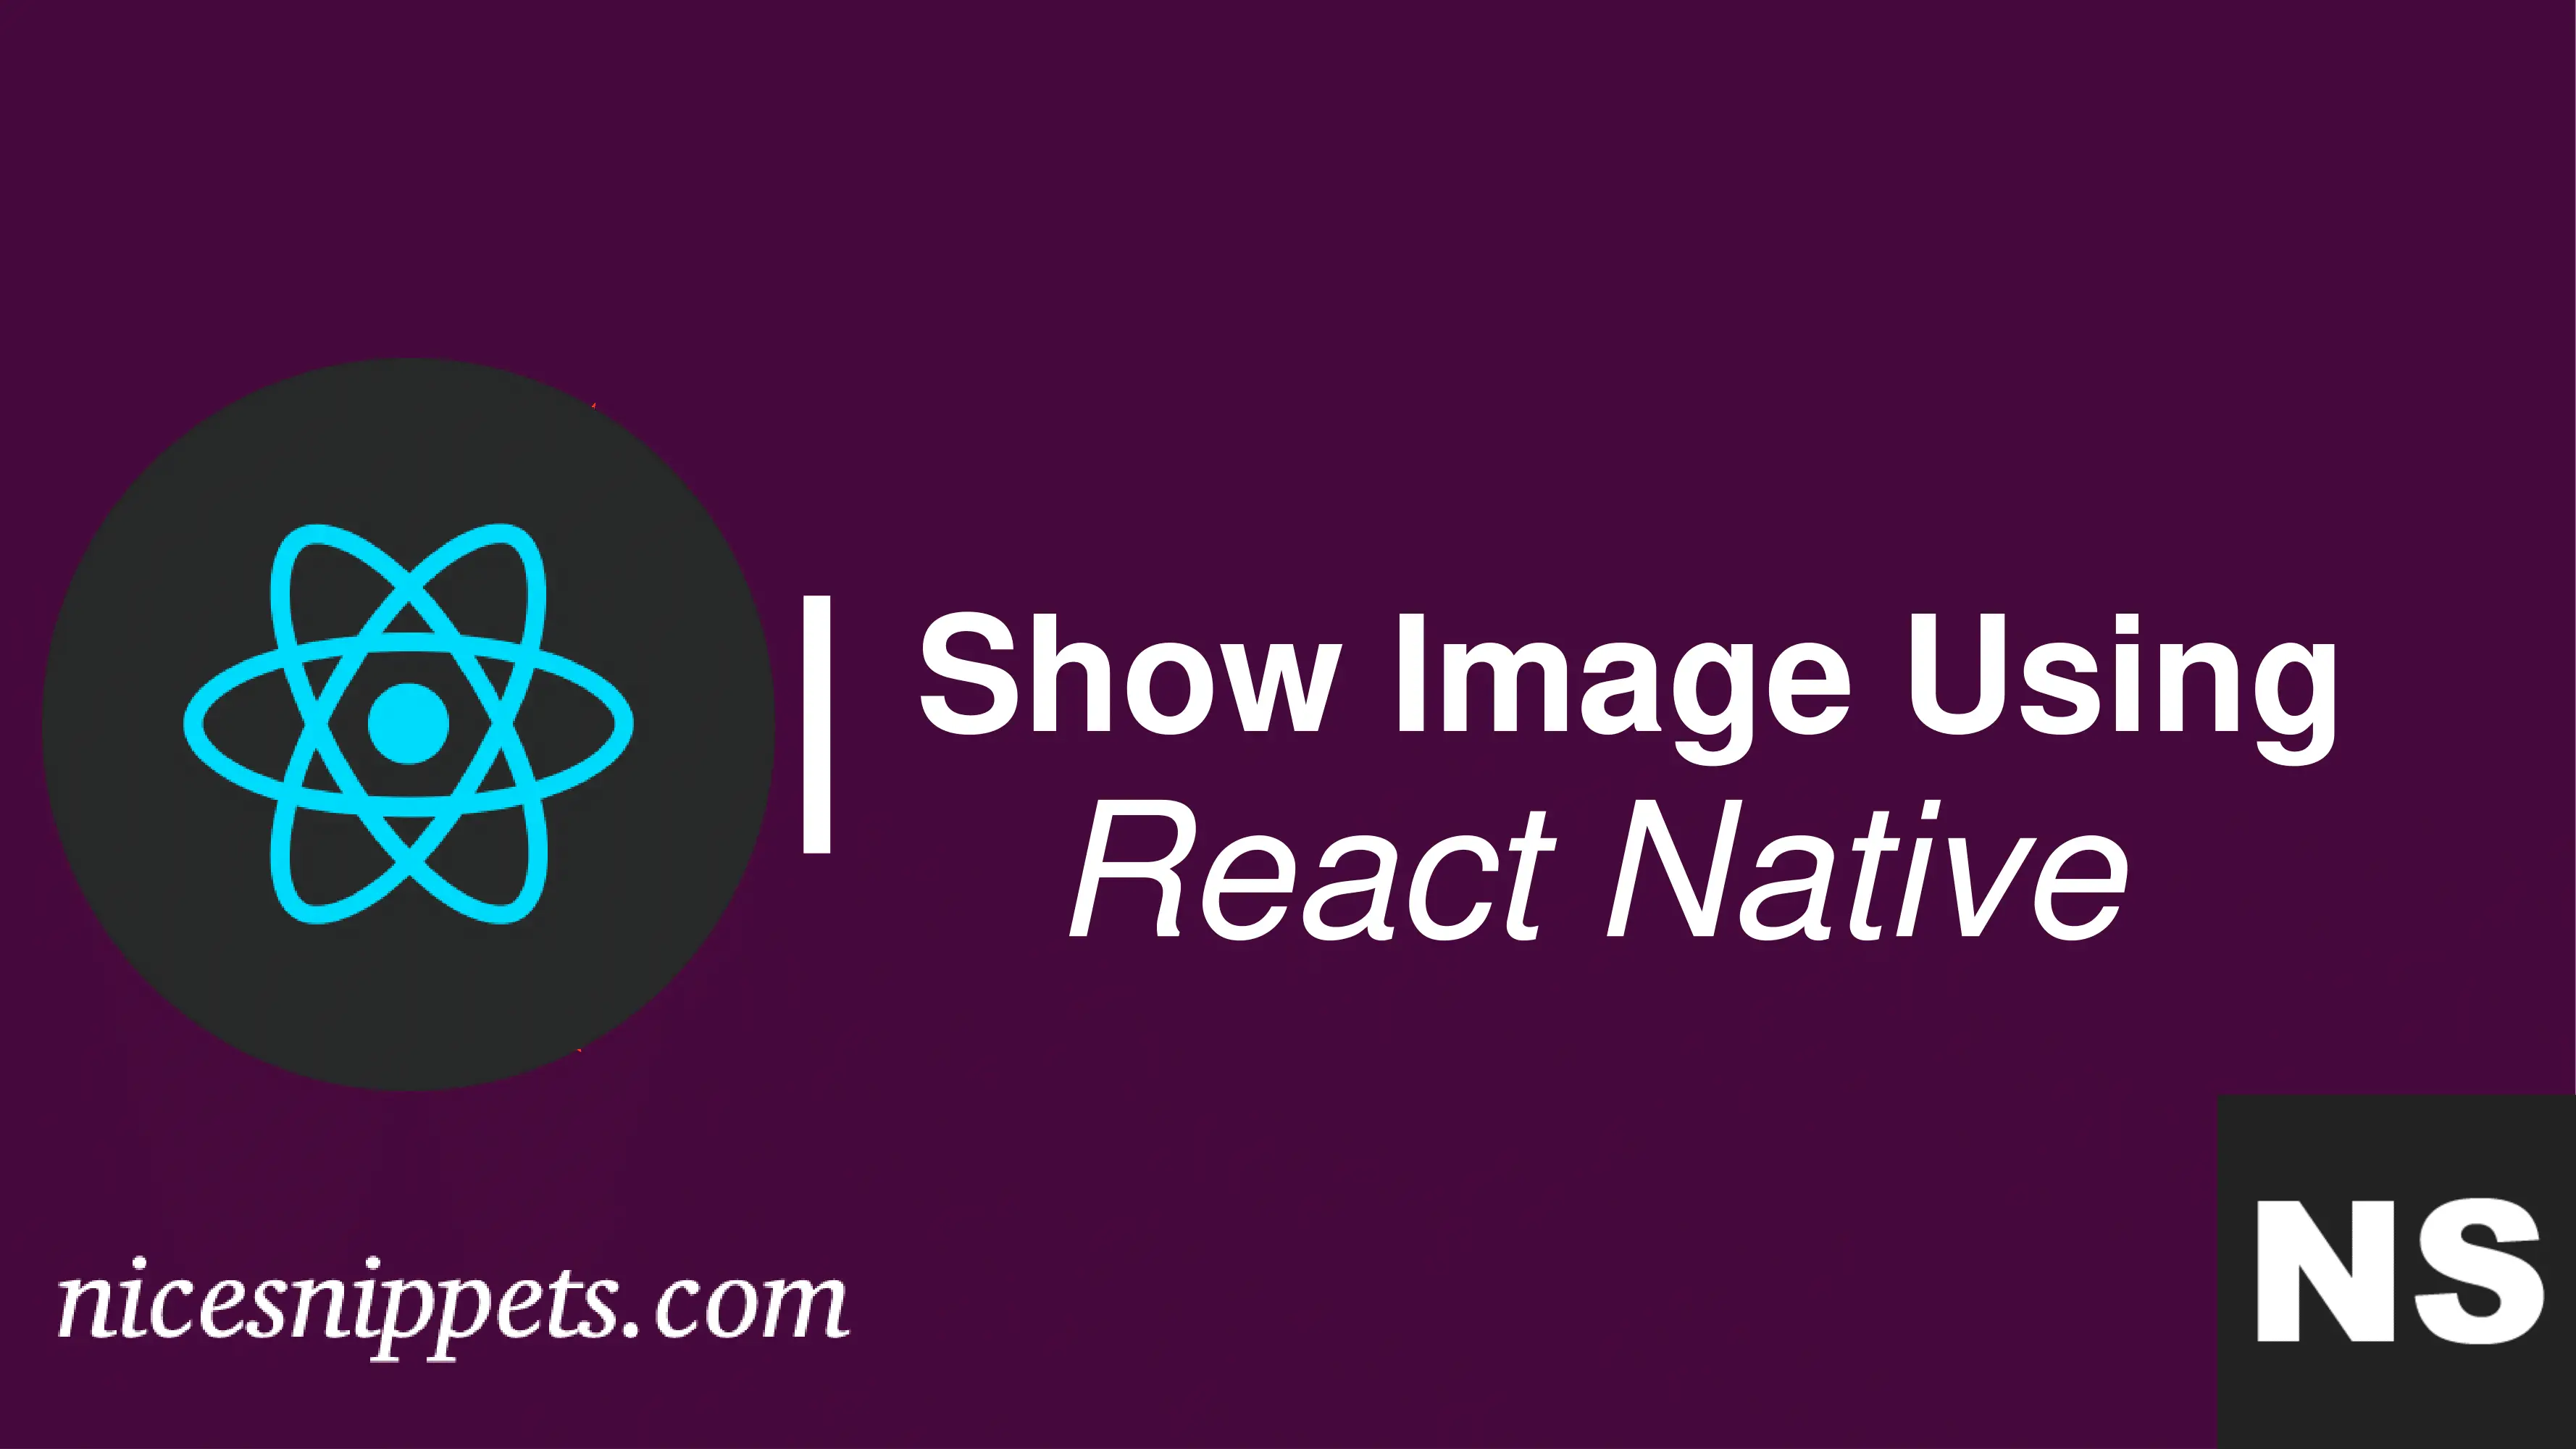 How to Show Image Using React Native?